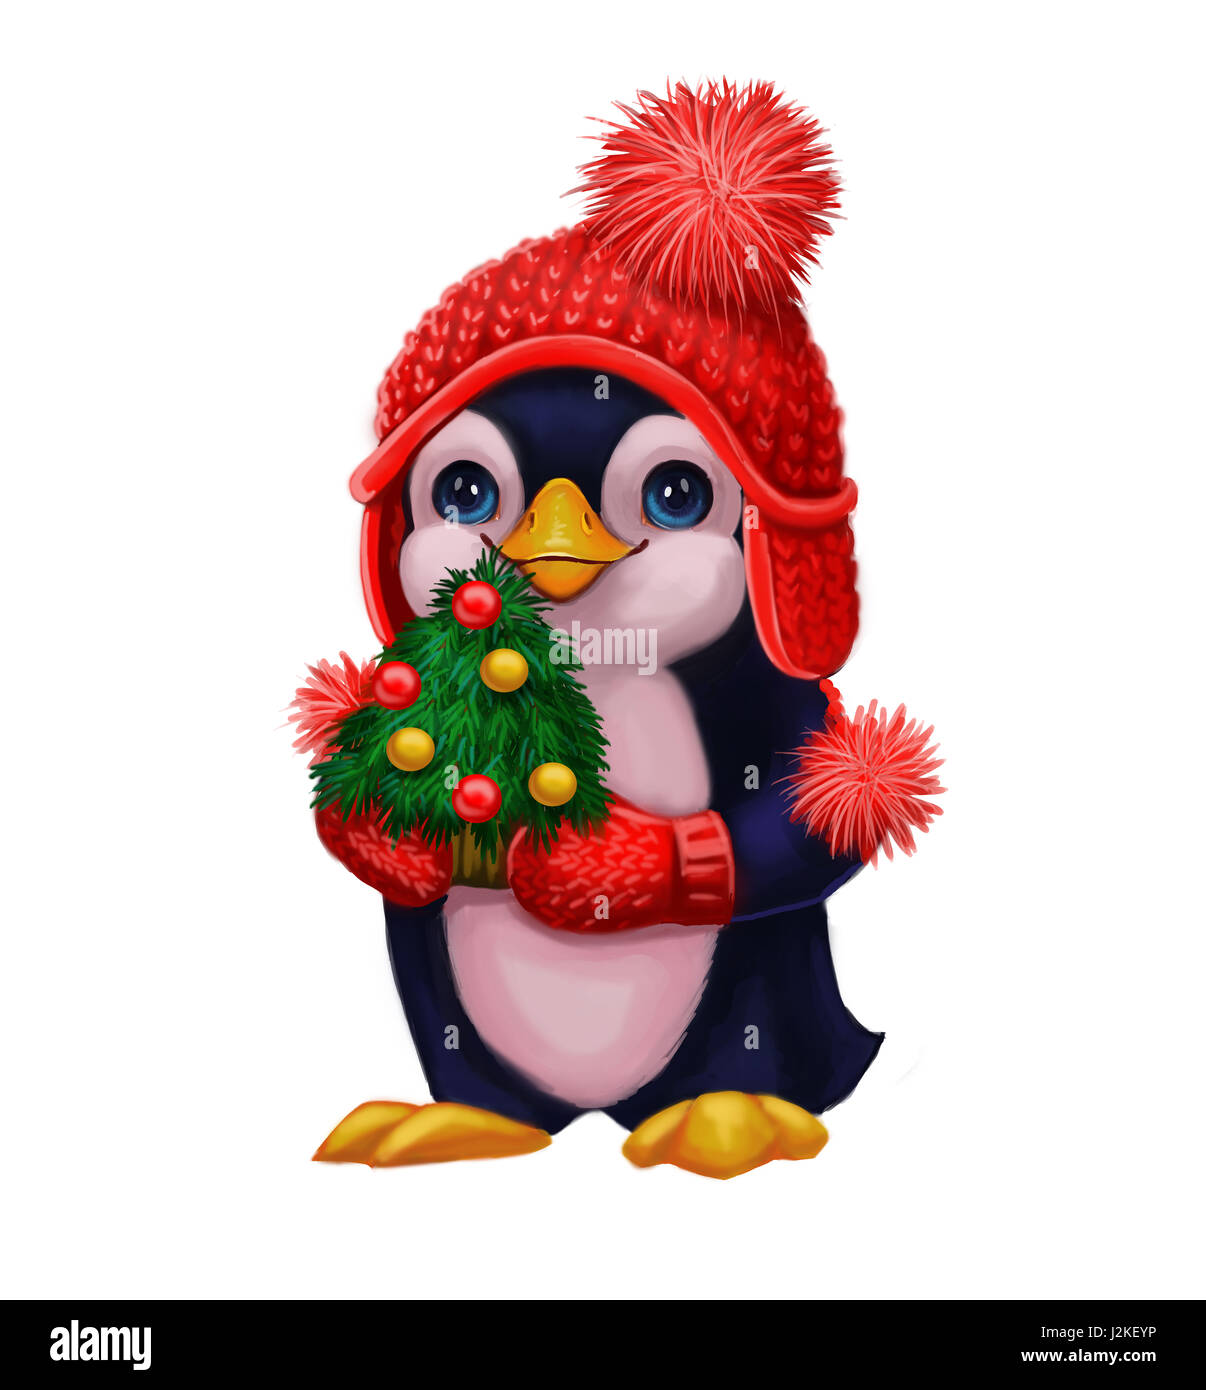 Season's Greetings with Little Penguin Character in Funny Hat Holding Christmas Tree - Happy Holidays and New Year, Hand-Drawn Stock Photo